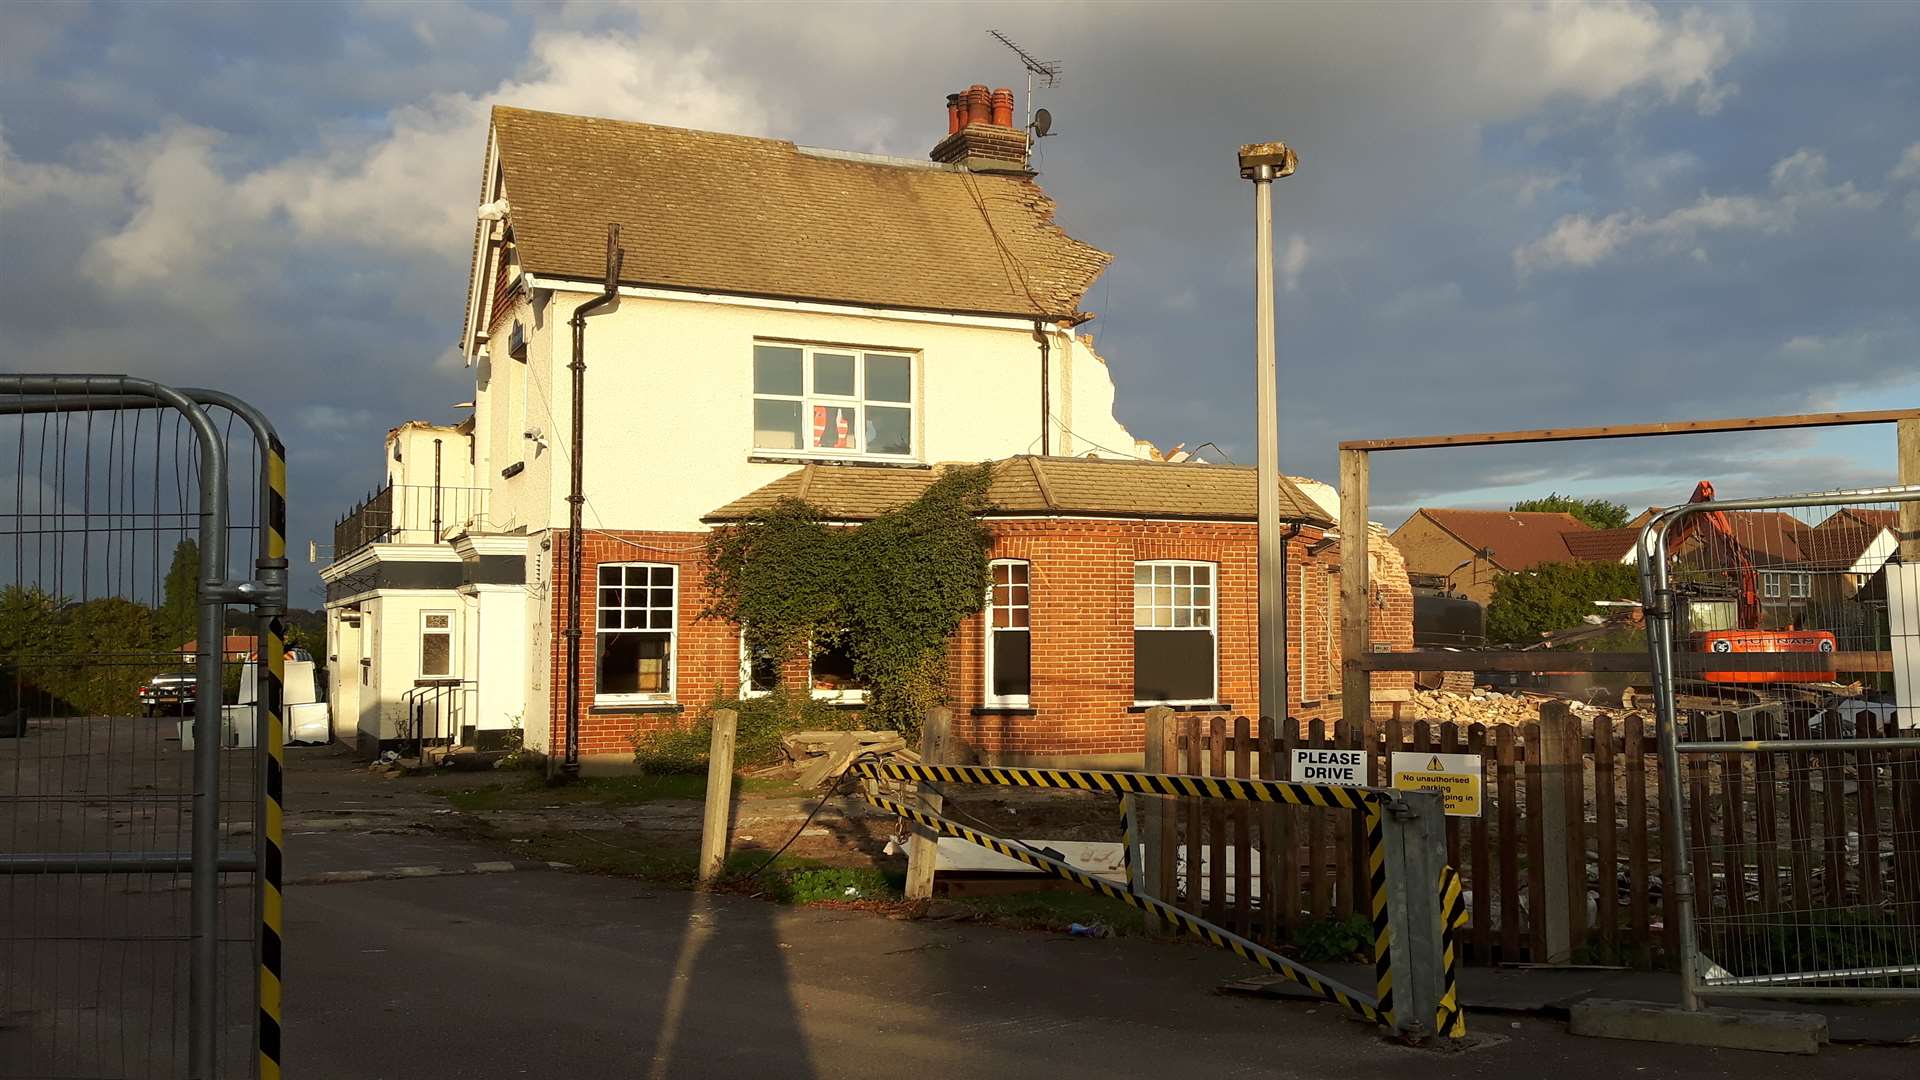 Demolition on the pub started without permission